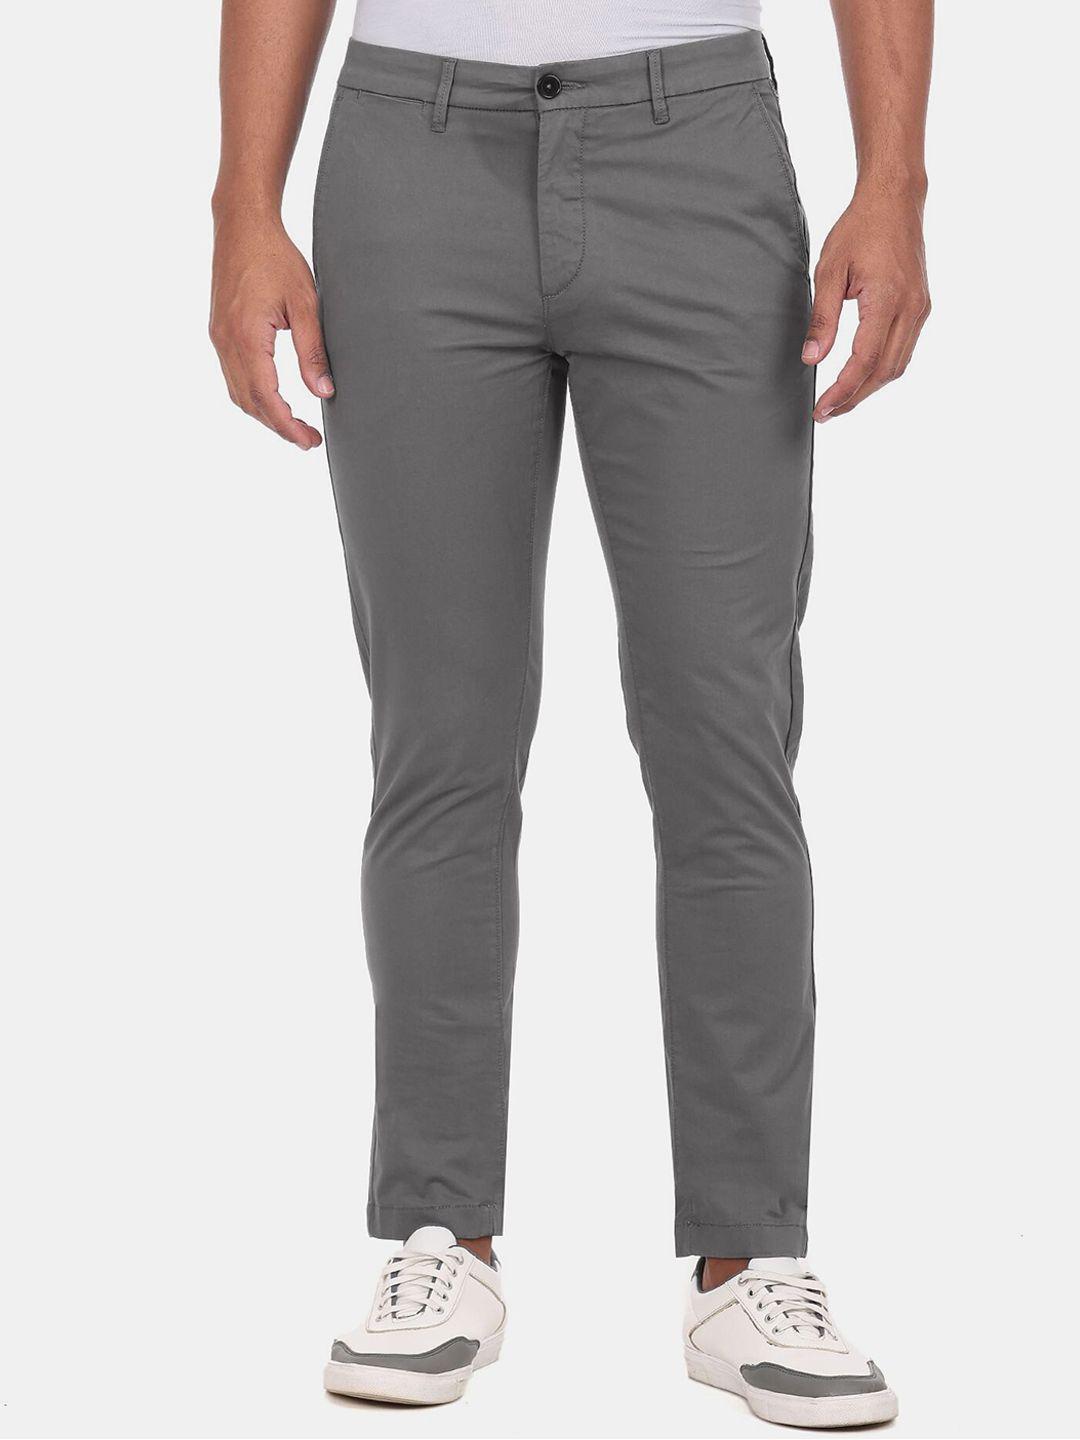 u s polo assn men grey solid trousers